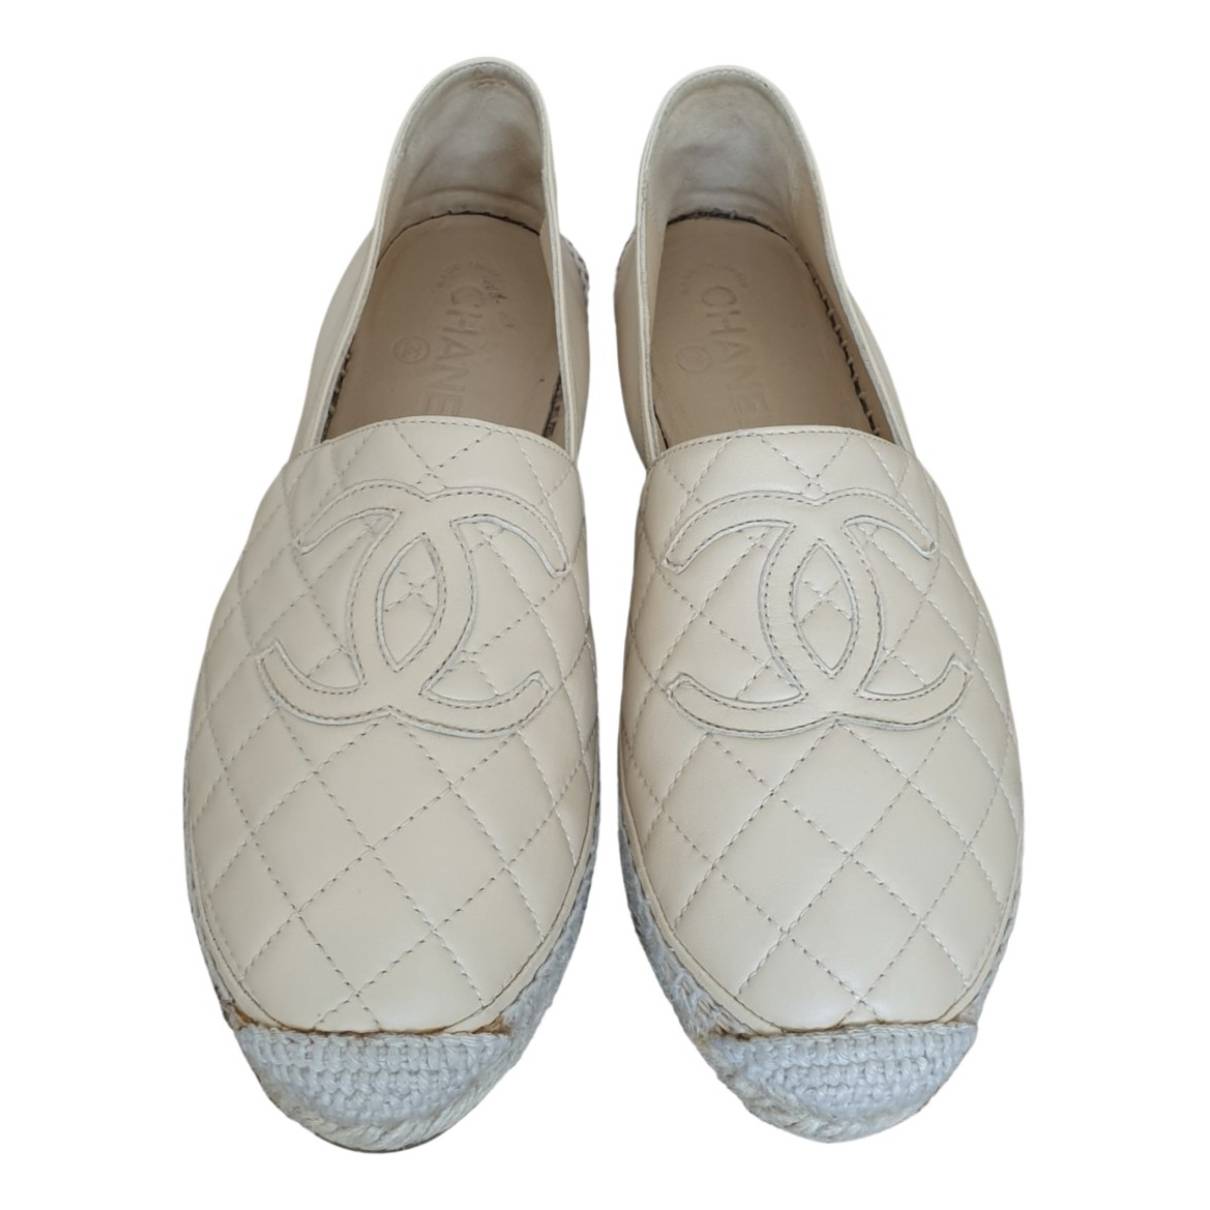 Leather espadrilles Chanel Beige size 38 EU in Leather - 29865659